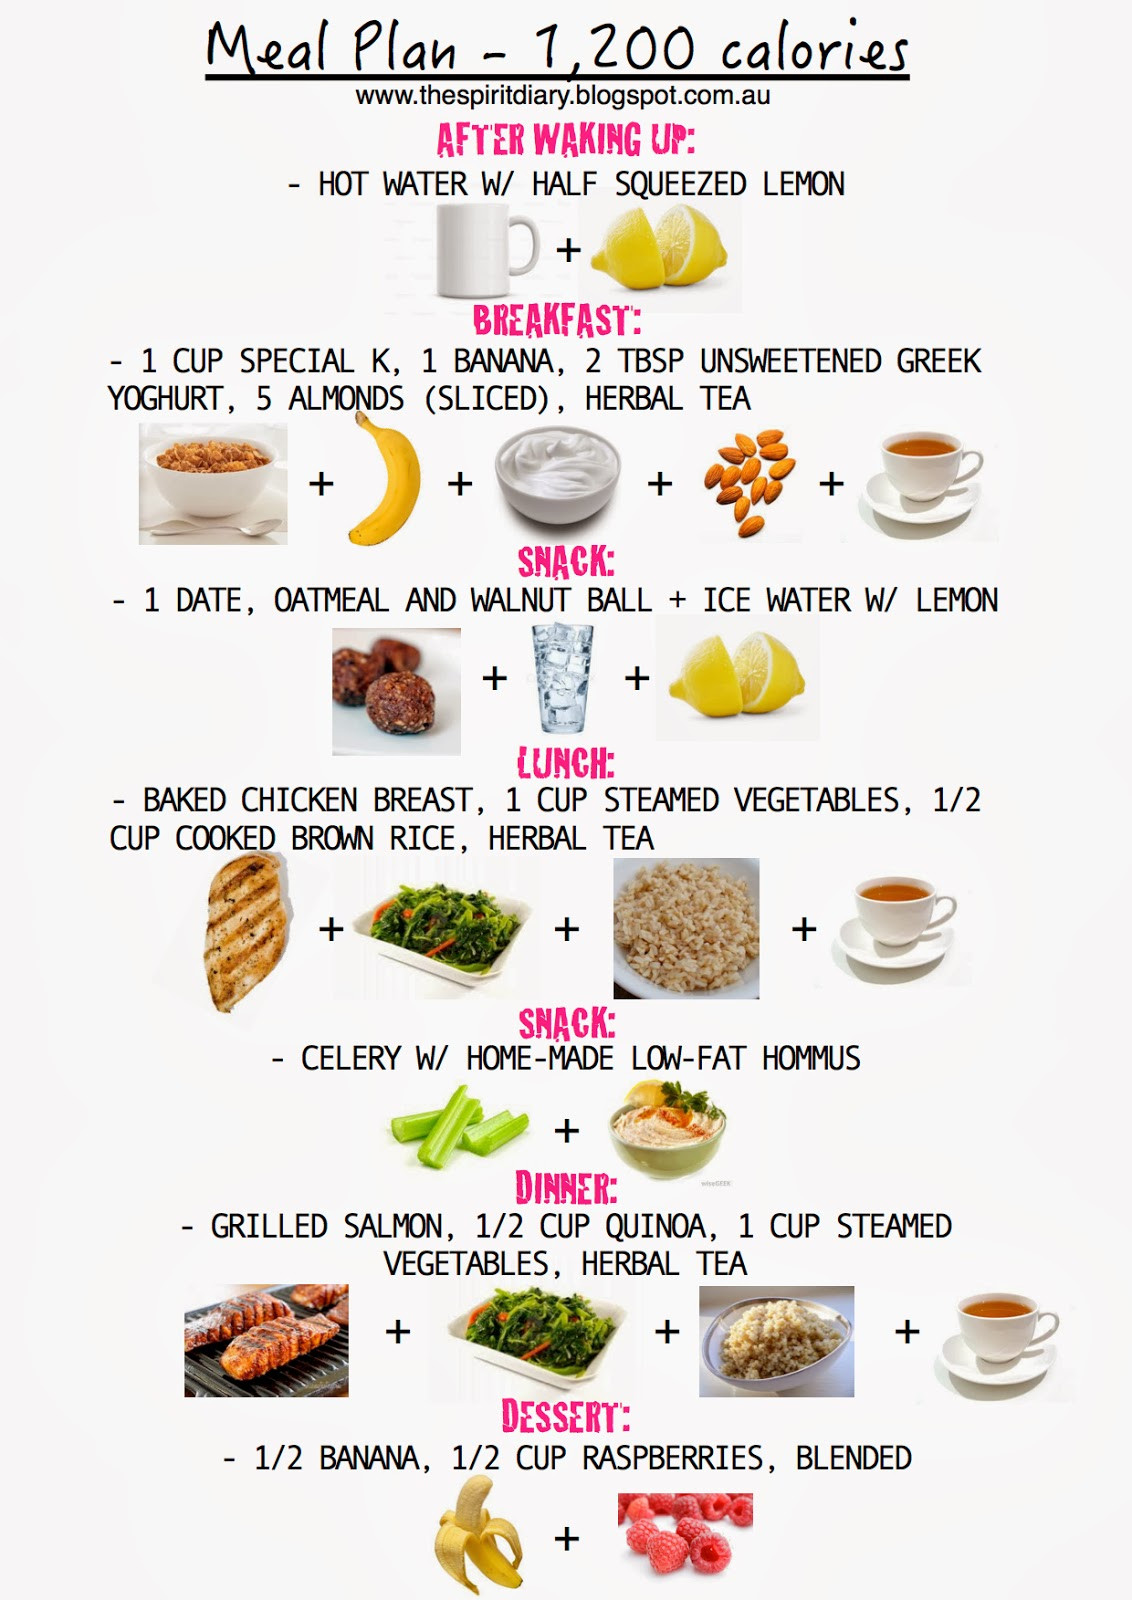 Low Calorie Diet Meal Plan
 The Spirit Diary Meal Plan 1 200 calories summer